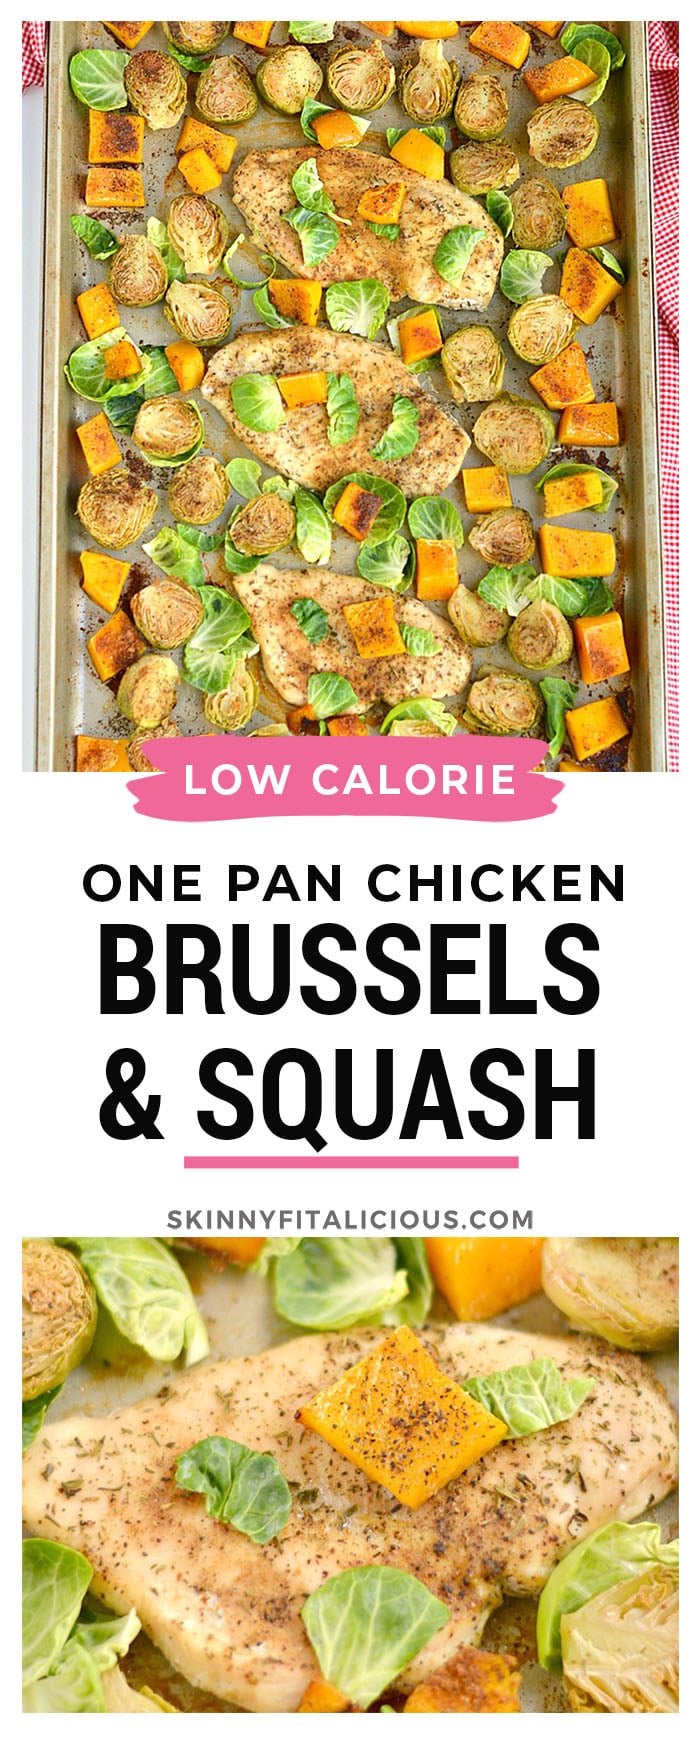 This One Pan Chicken Brussels Sprouts & Butternut Squash is perfectly baked on a single pan for an EASY and filling dinner. A Whole30, Paleo, Gluten Free, Low Calorie meal that takes 30 minutes, ideal for any weeknight meals or meal prepping!